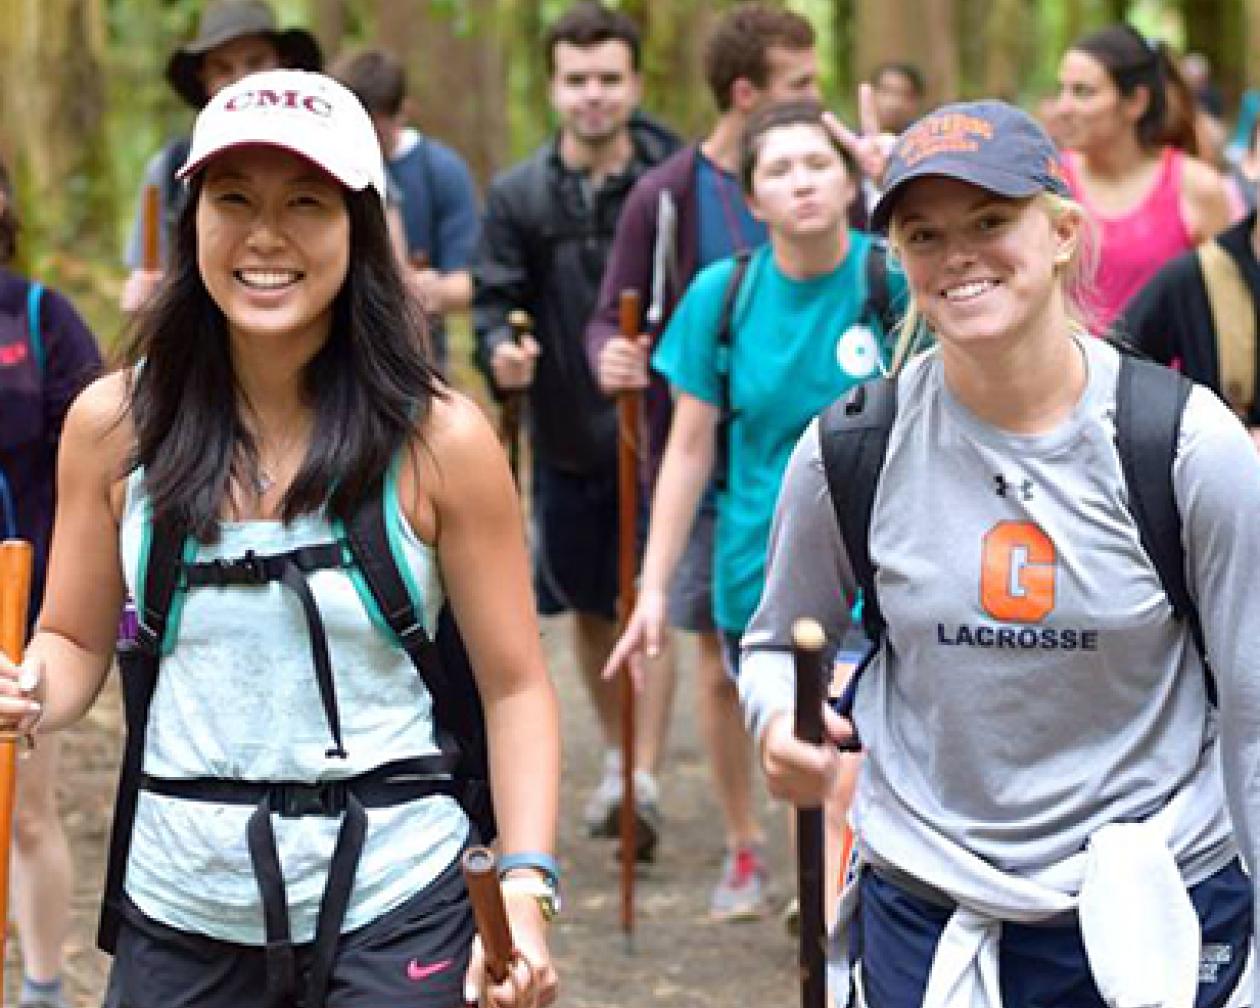 Students walking along a forest trail with walking sticks and smiling at the camera.